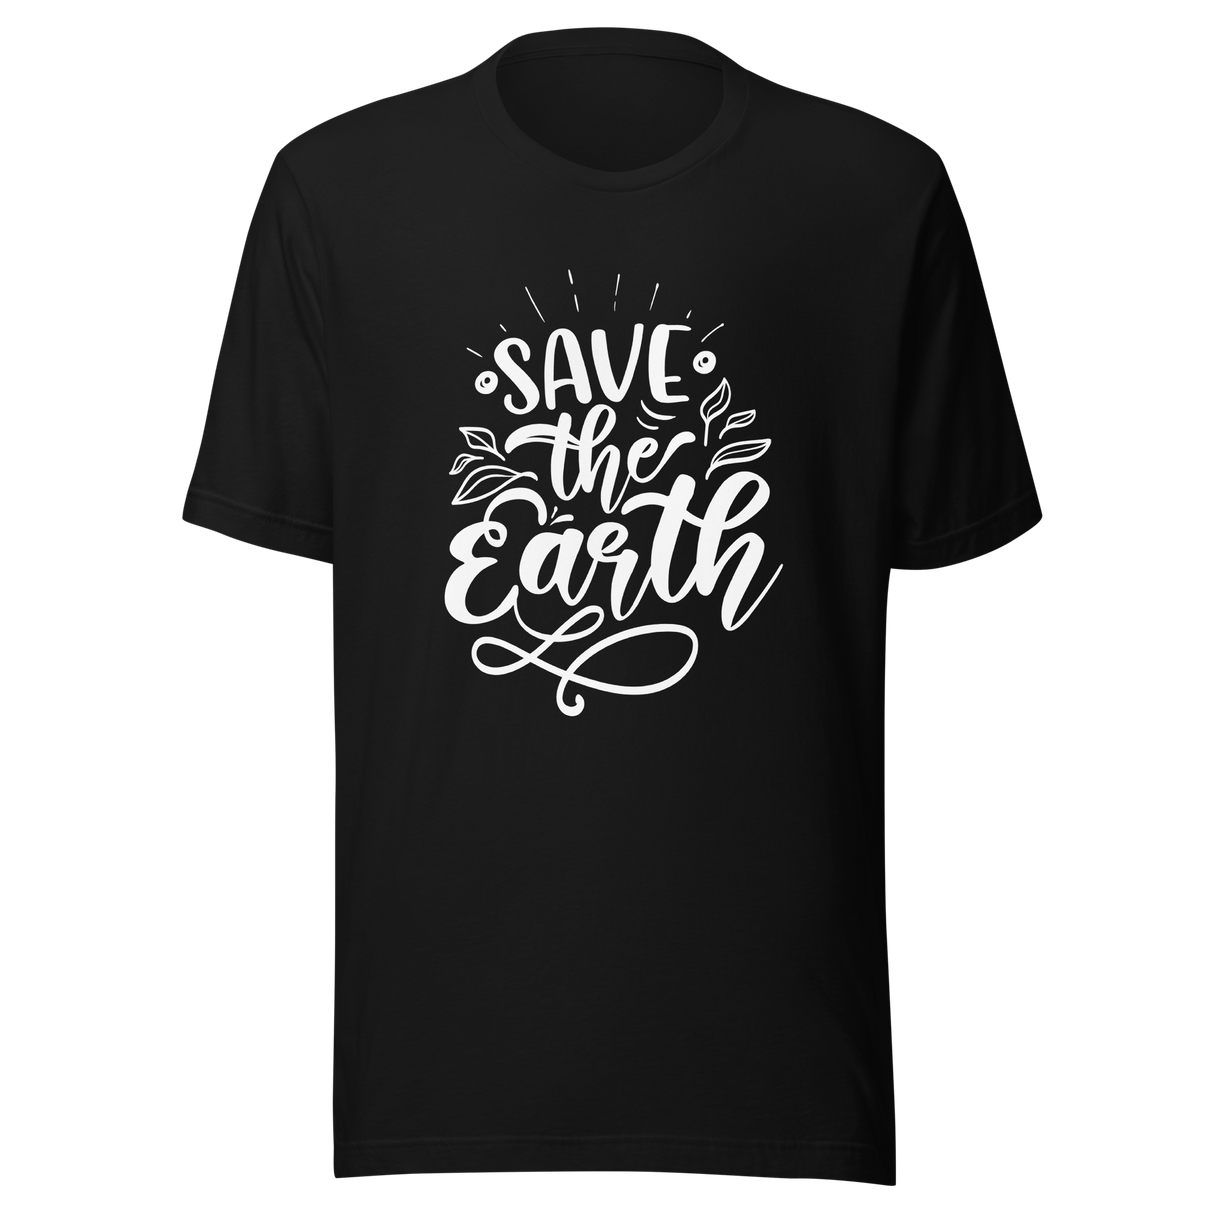 save-the-earth-earth-tee-nature-t-shirt-save-the-earth-tee-global-warming-t-shirt-earth-day-tee#color_black